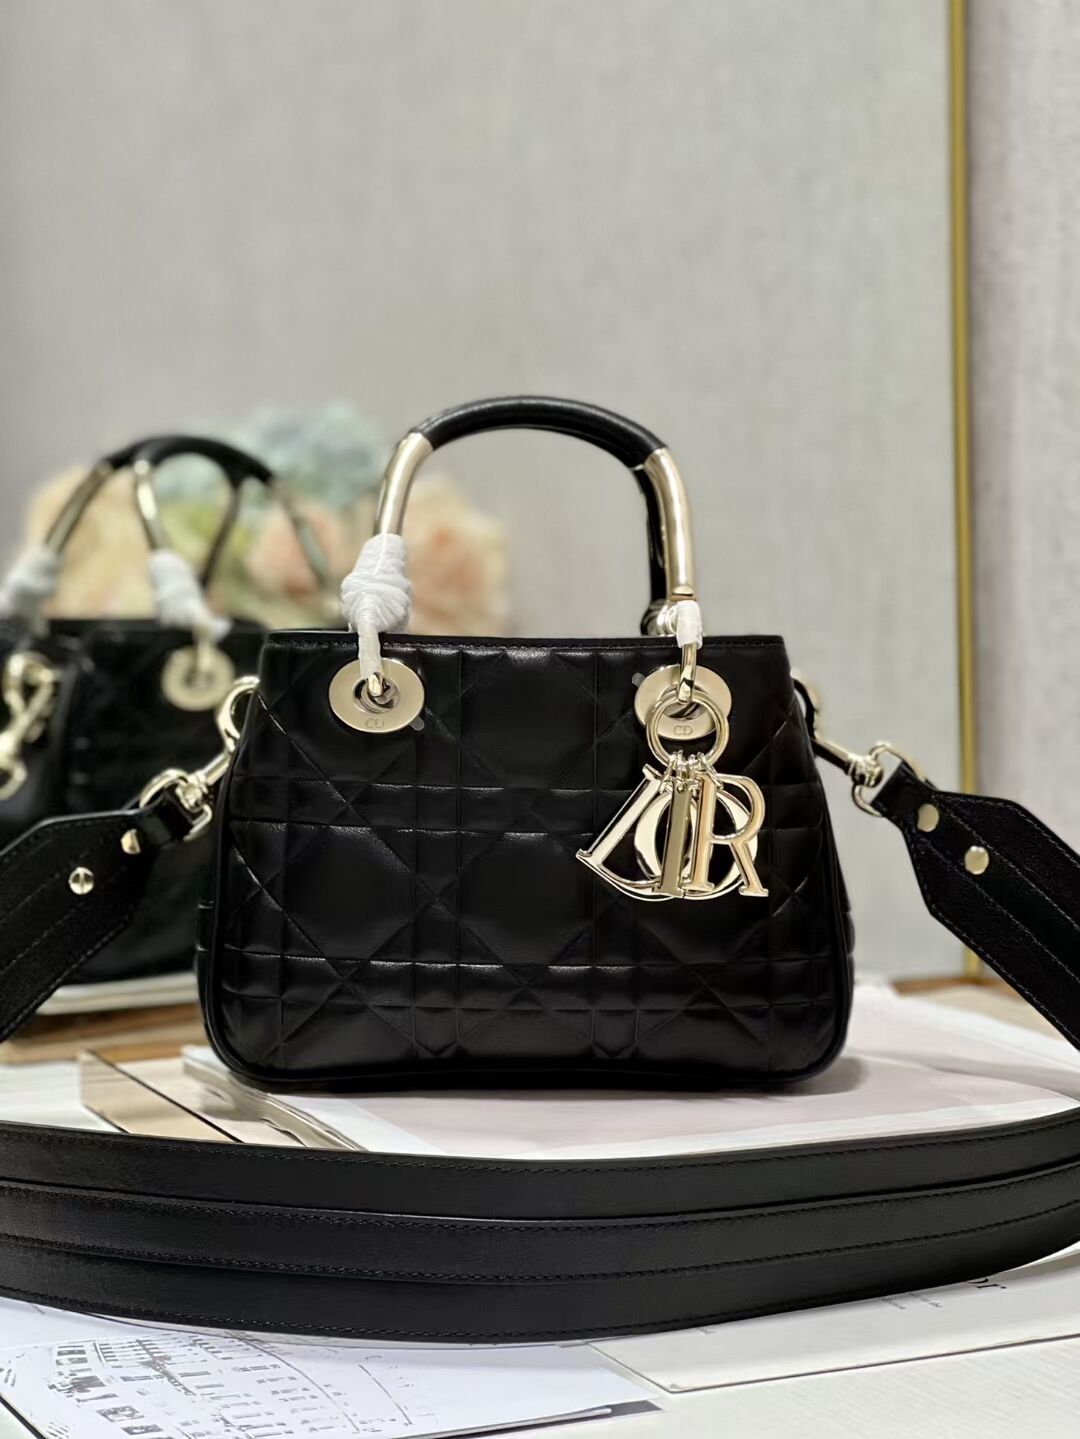 LADY DIOR TOP HANDLE SMALL BAG Cannage Lambskin C9228 BLACK&GOLD